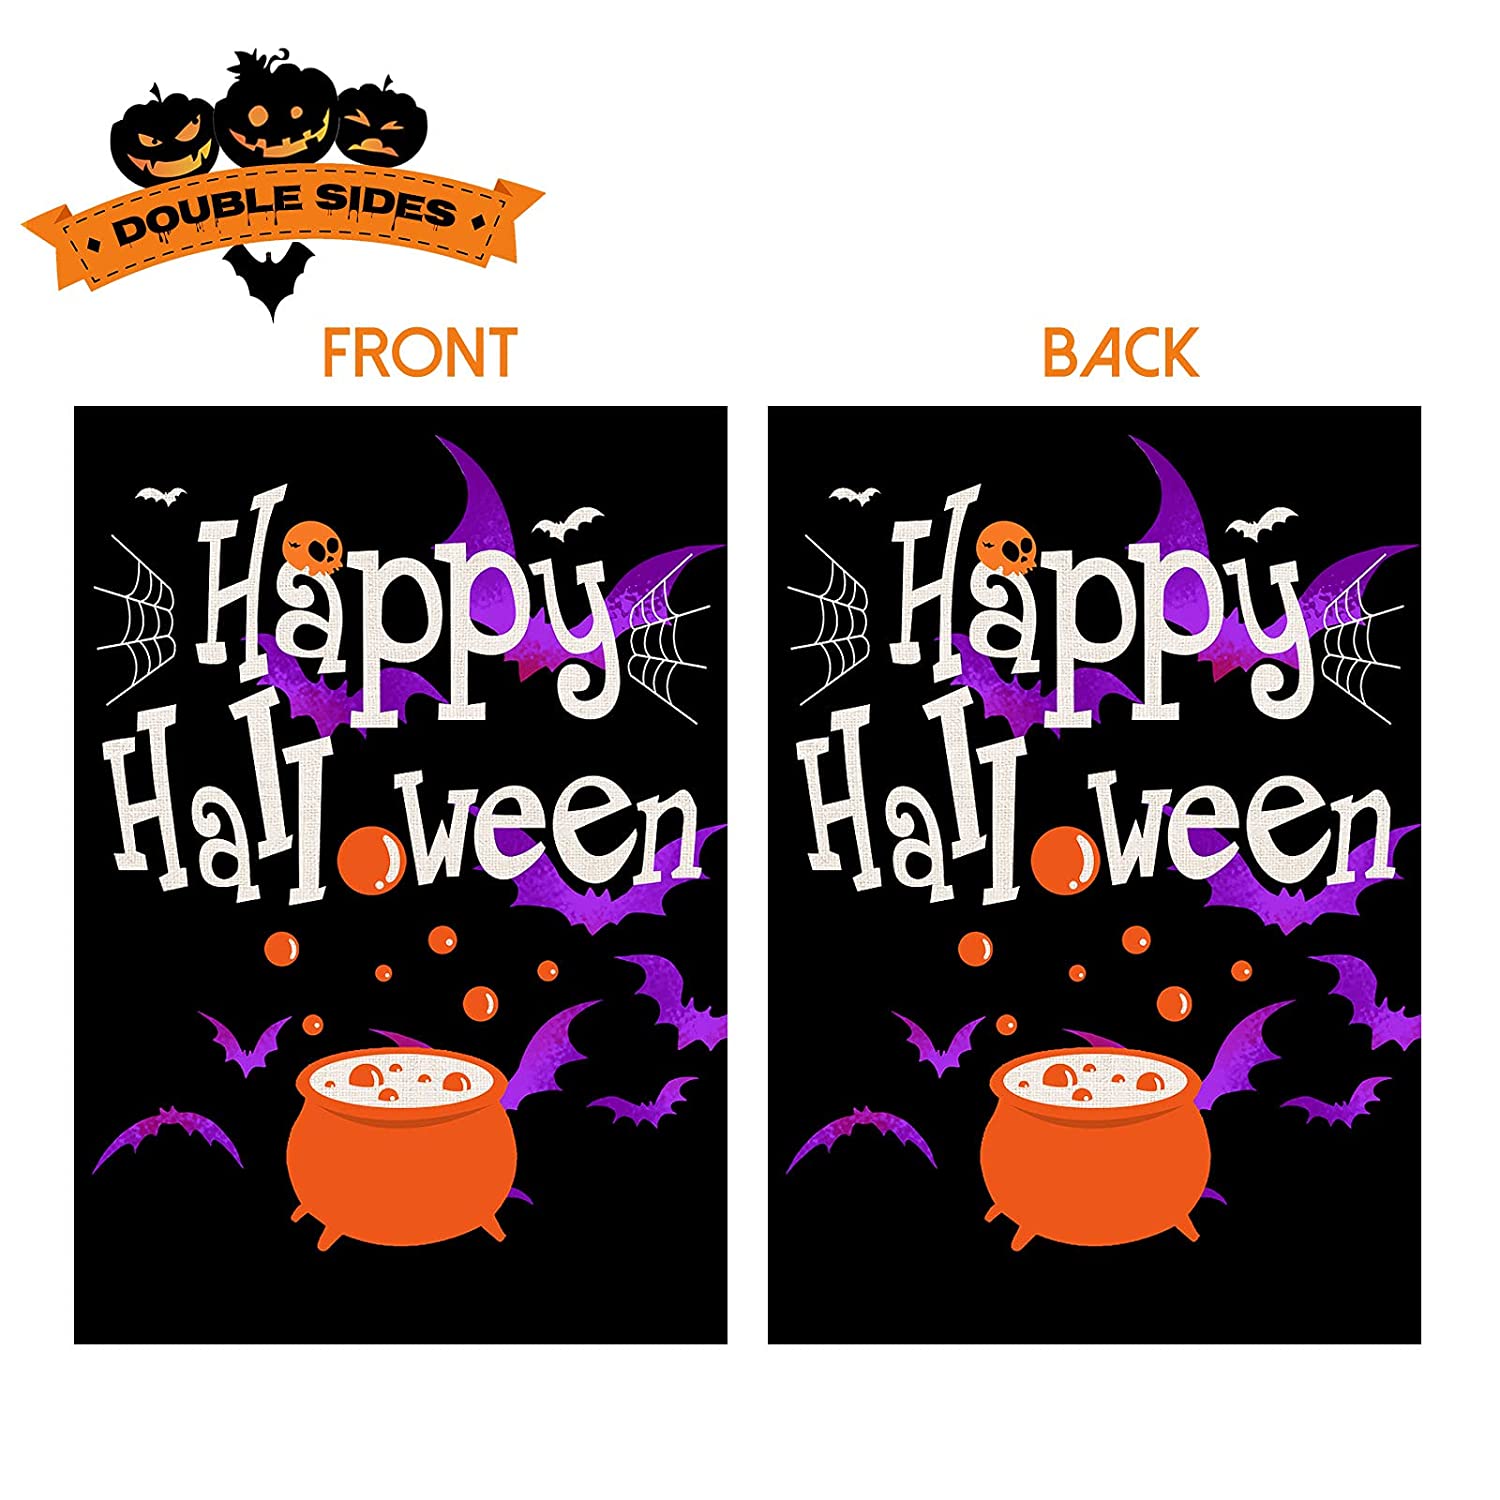 2 Pcs Double-Sided Happy Halloween Garden Flags 12 x 18 (Witch Hat, Pumpkin)